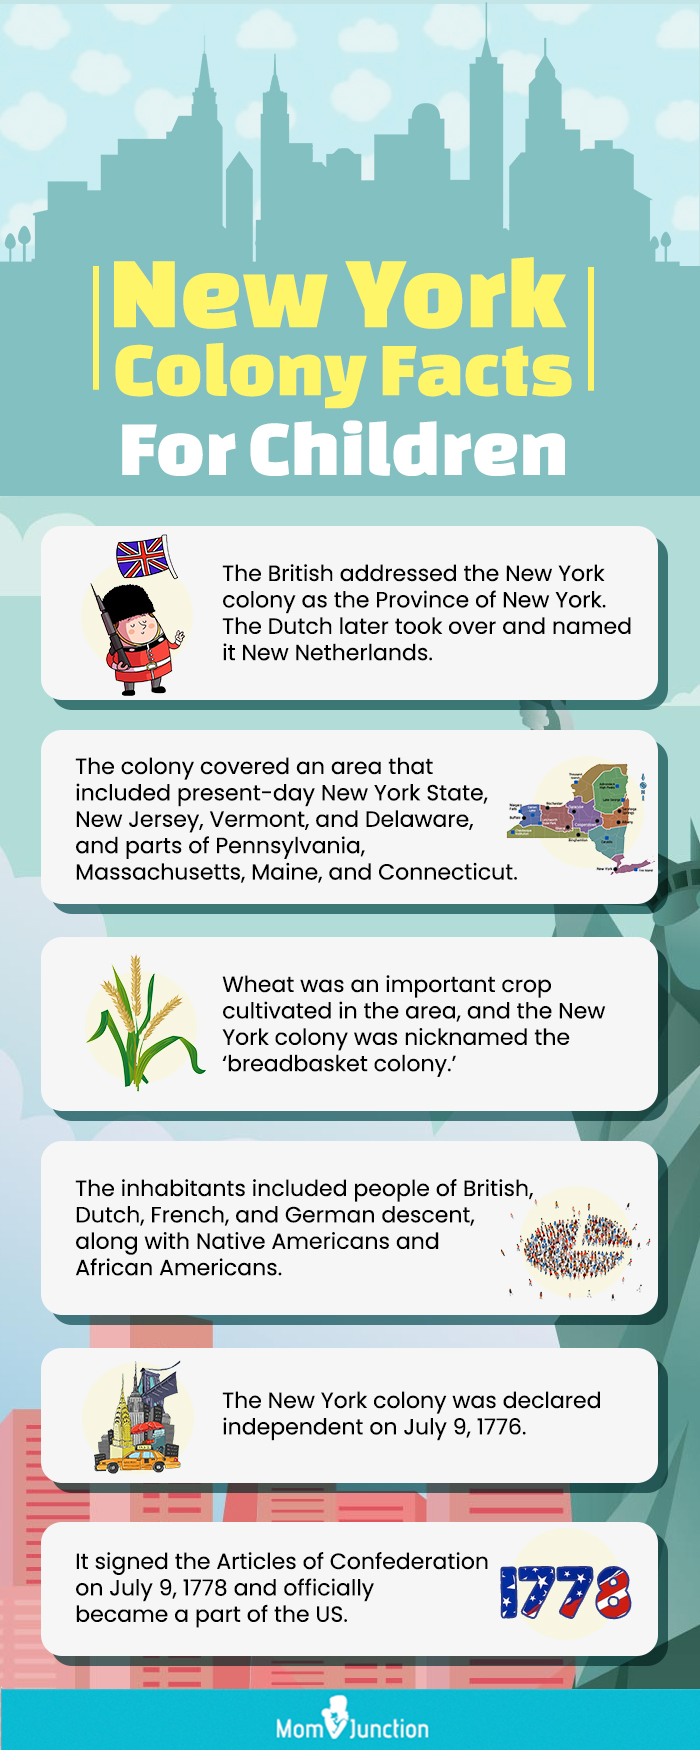 new york colony facts for children (infographic)